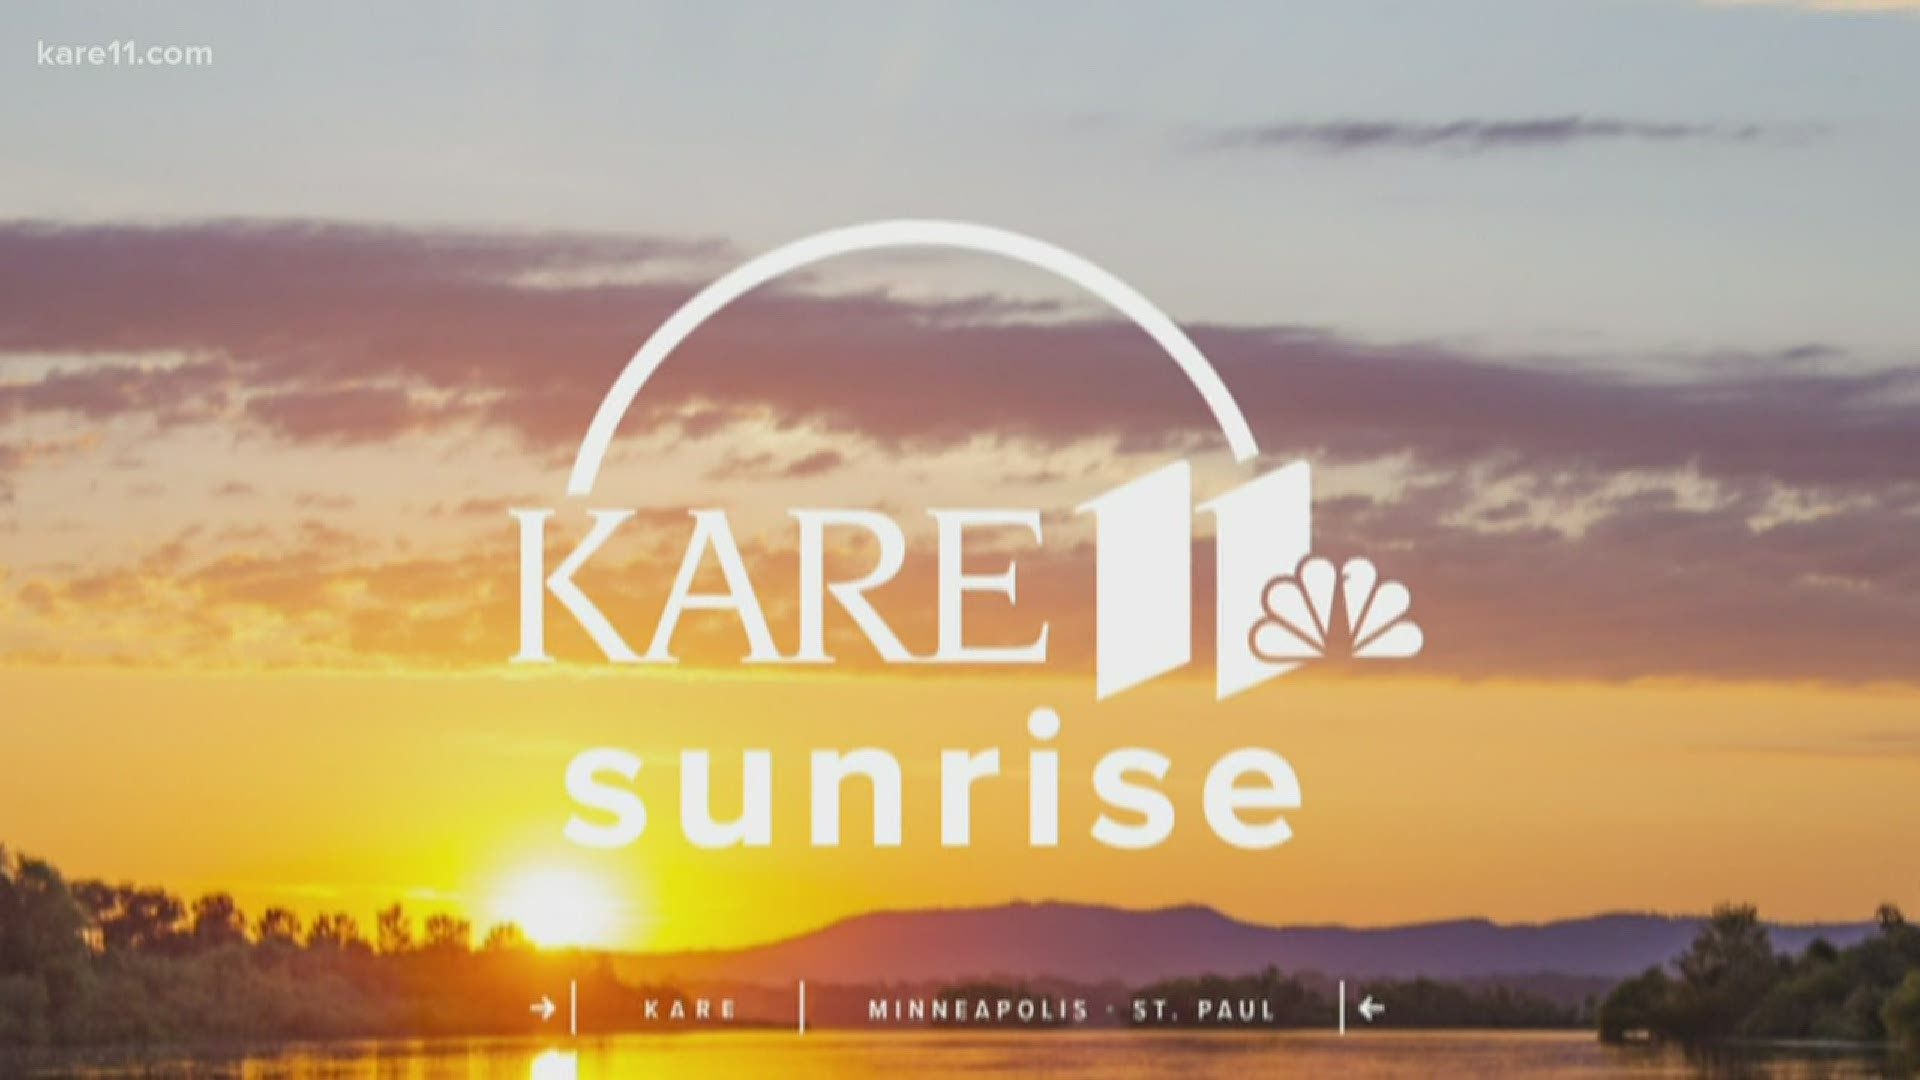 The early headlines from KARE 11 Sunrise.